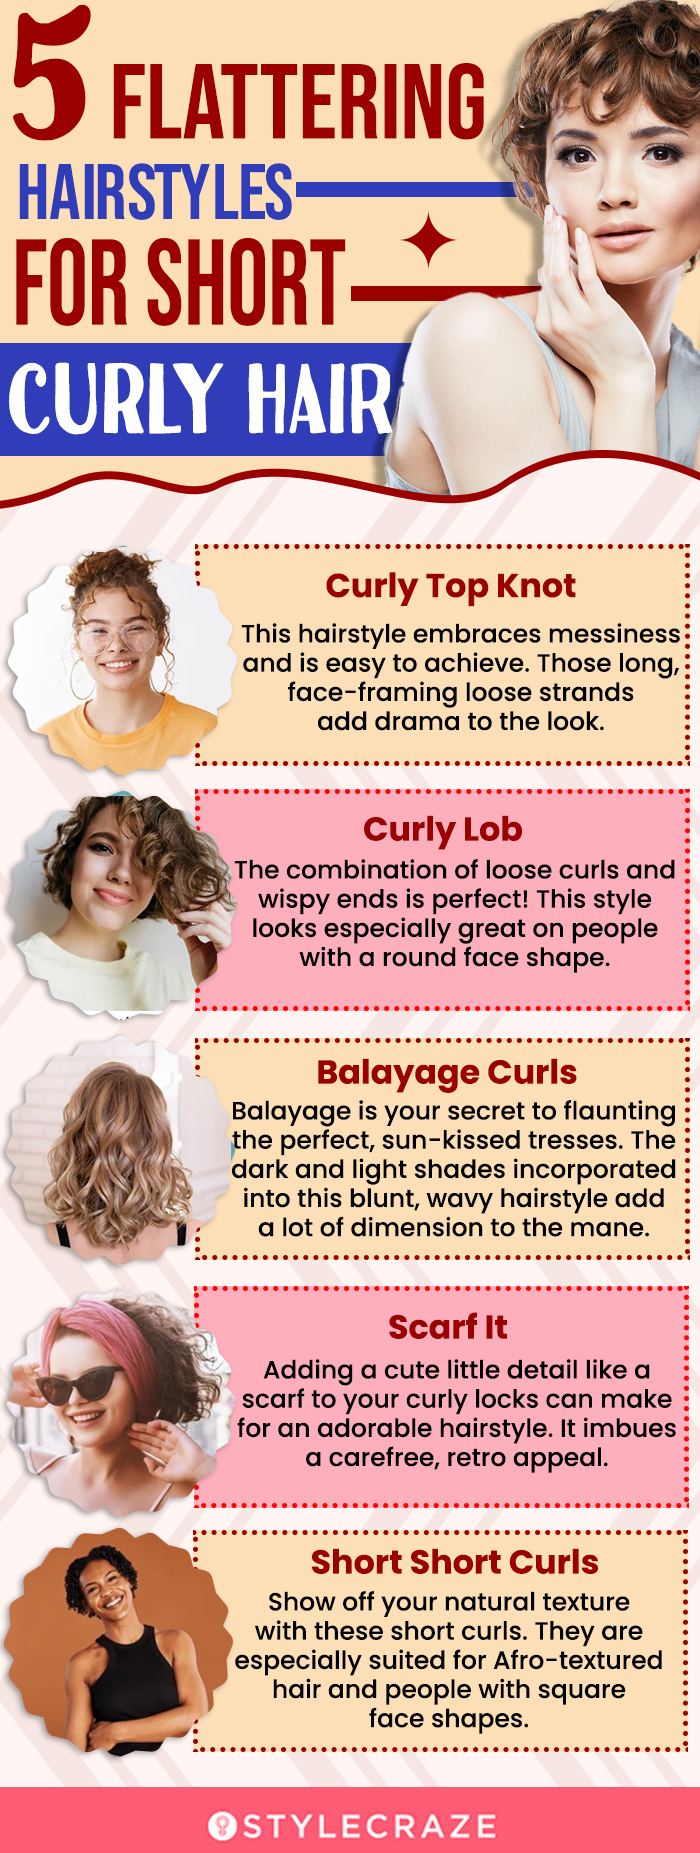 5 flattering hairstyles for short curly hair (infographic)